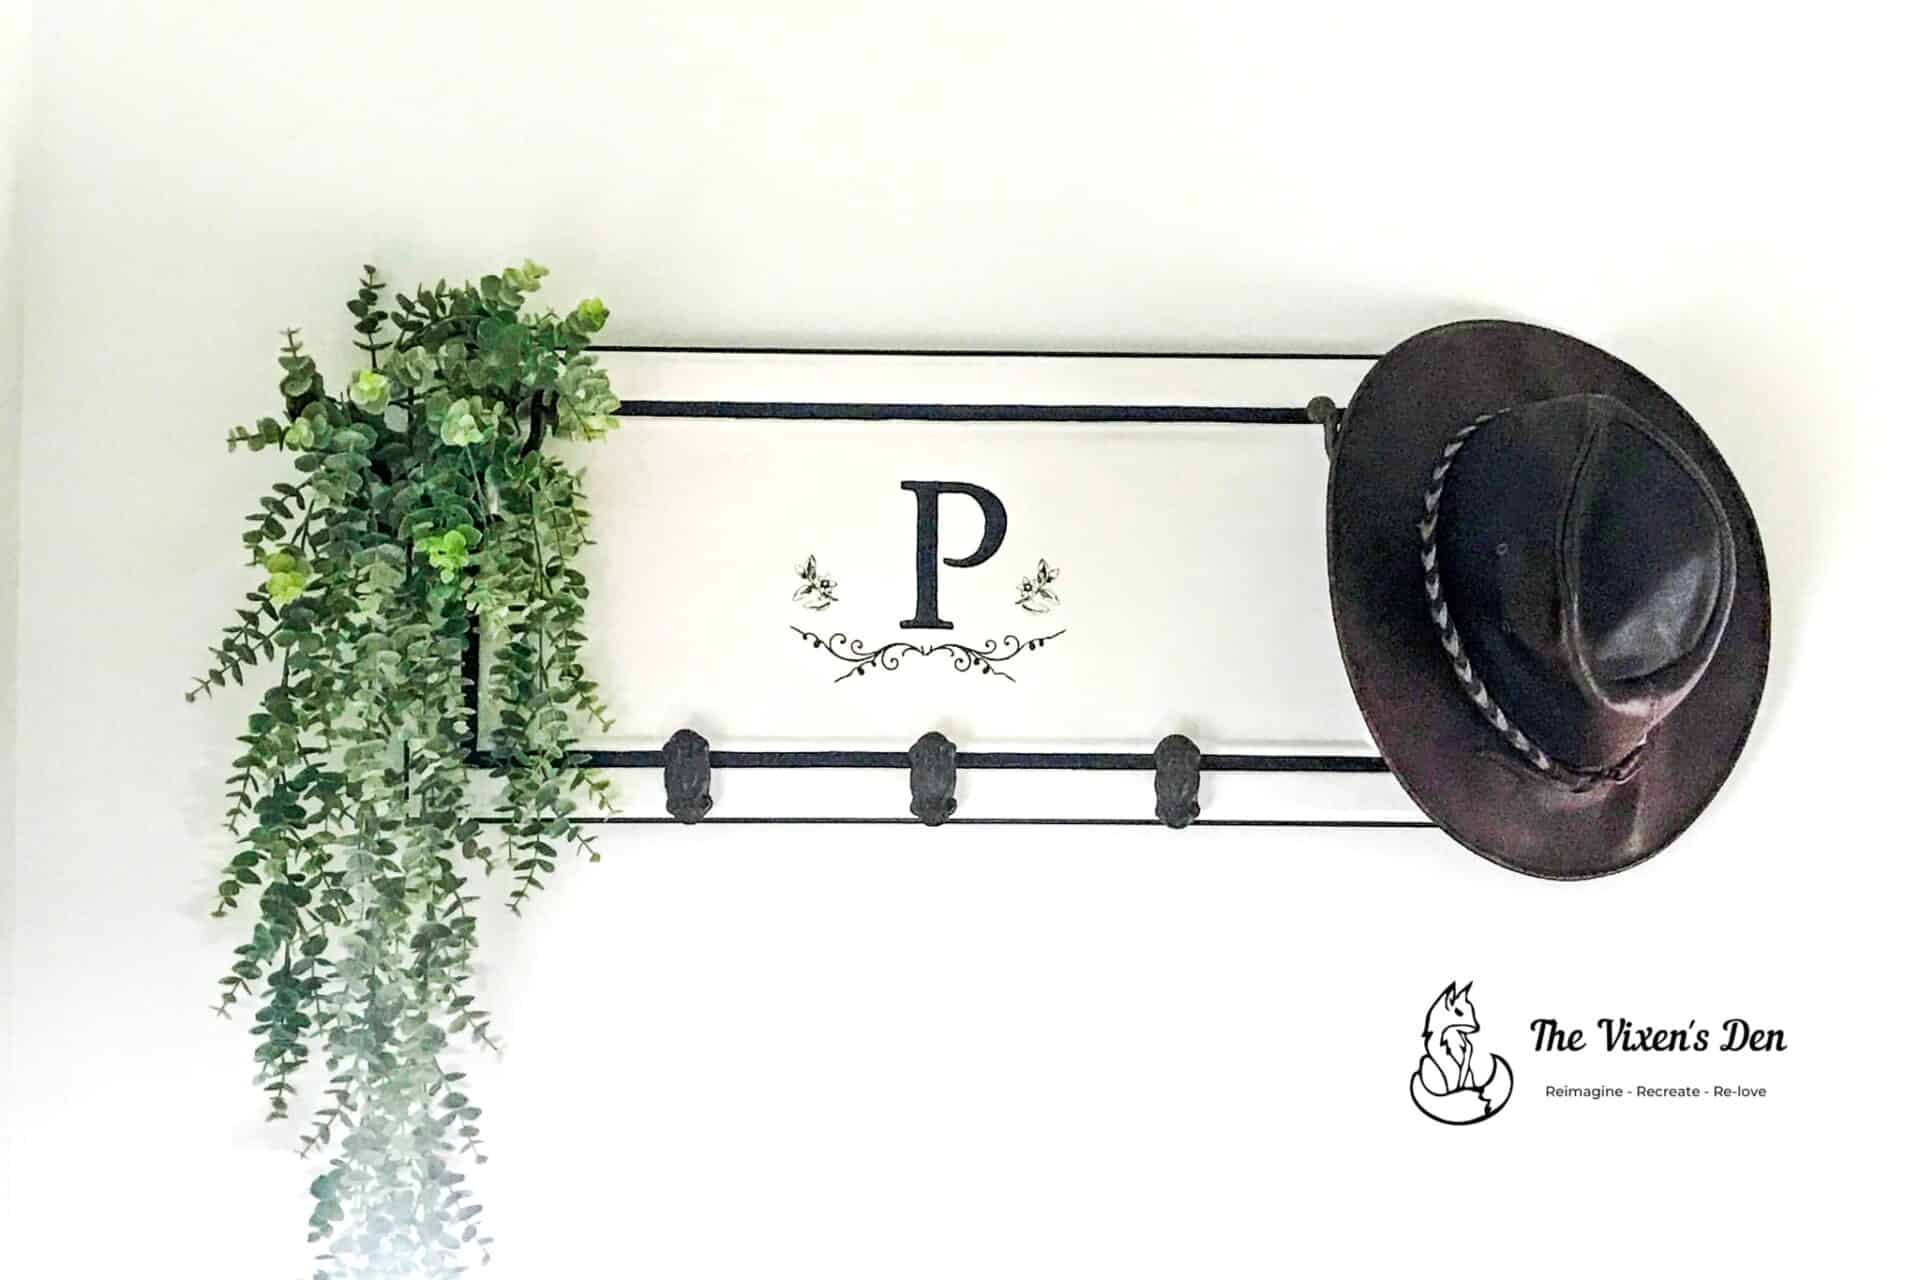 Cabinet Door Upcycle to a Hat Rack